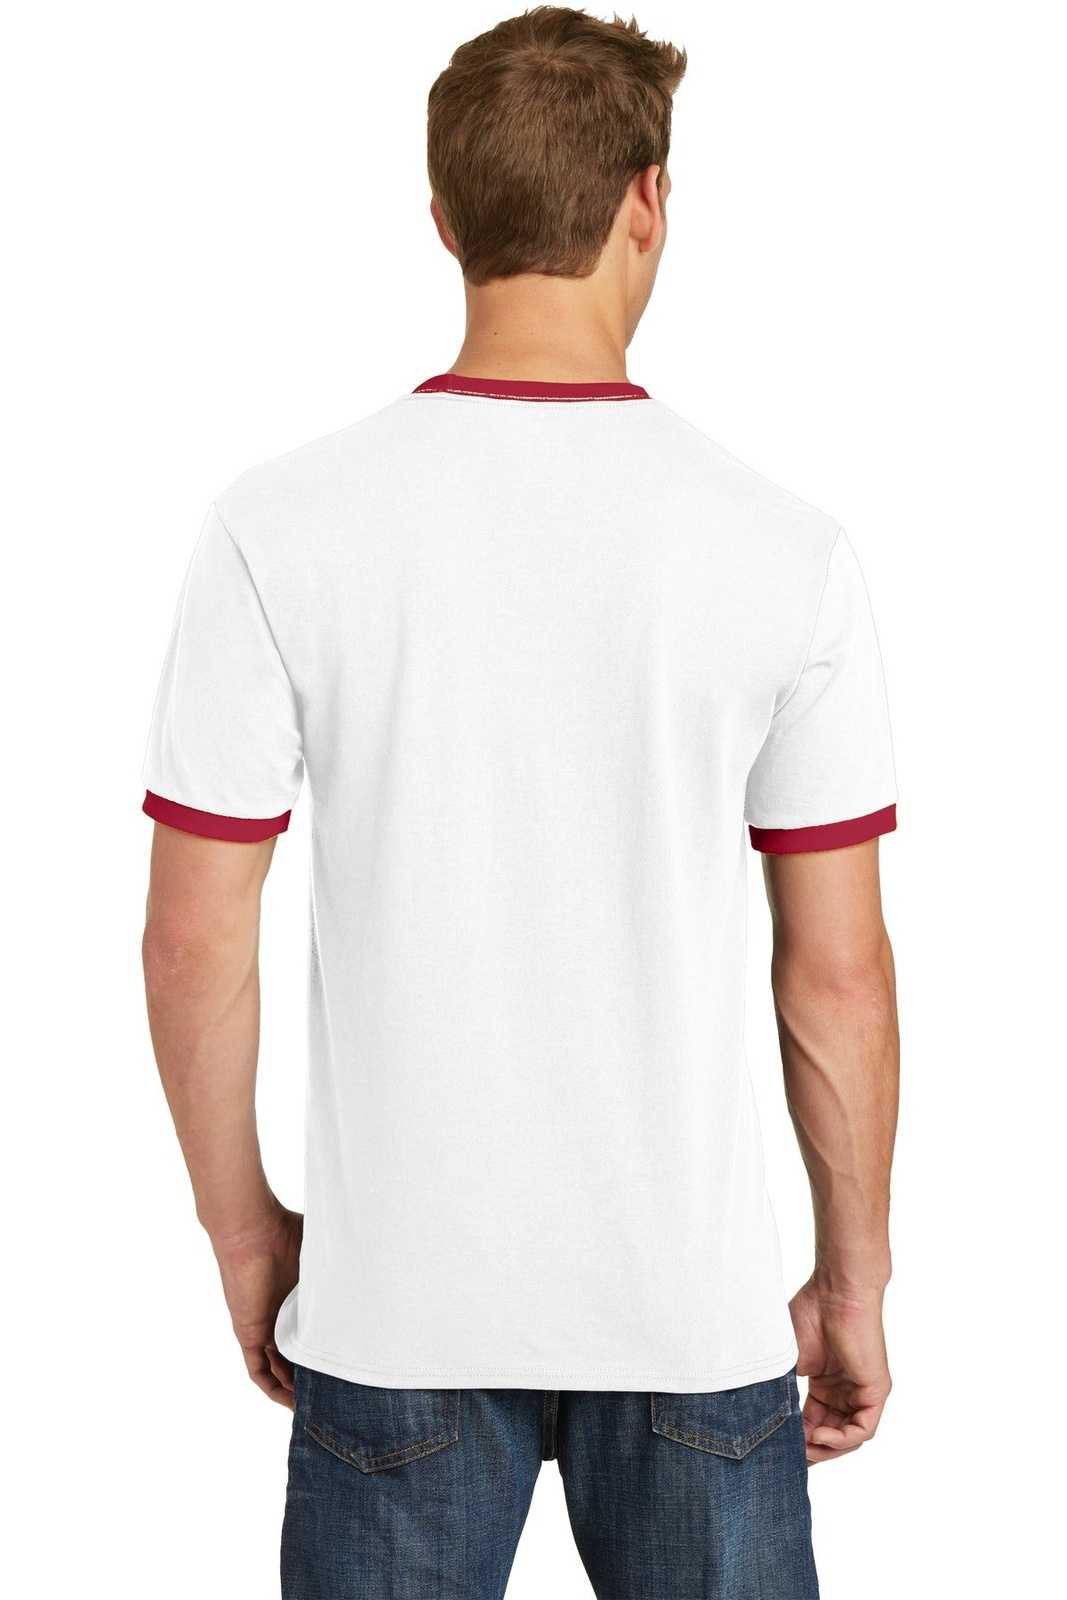 Port & Company PC54R Core Cotton Ringer Tee - White Red - HIT a Double - 1